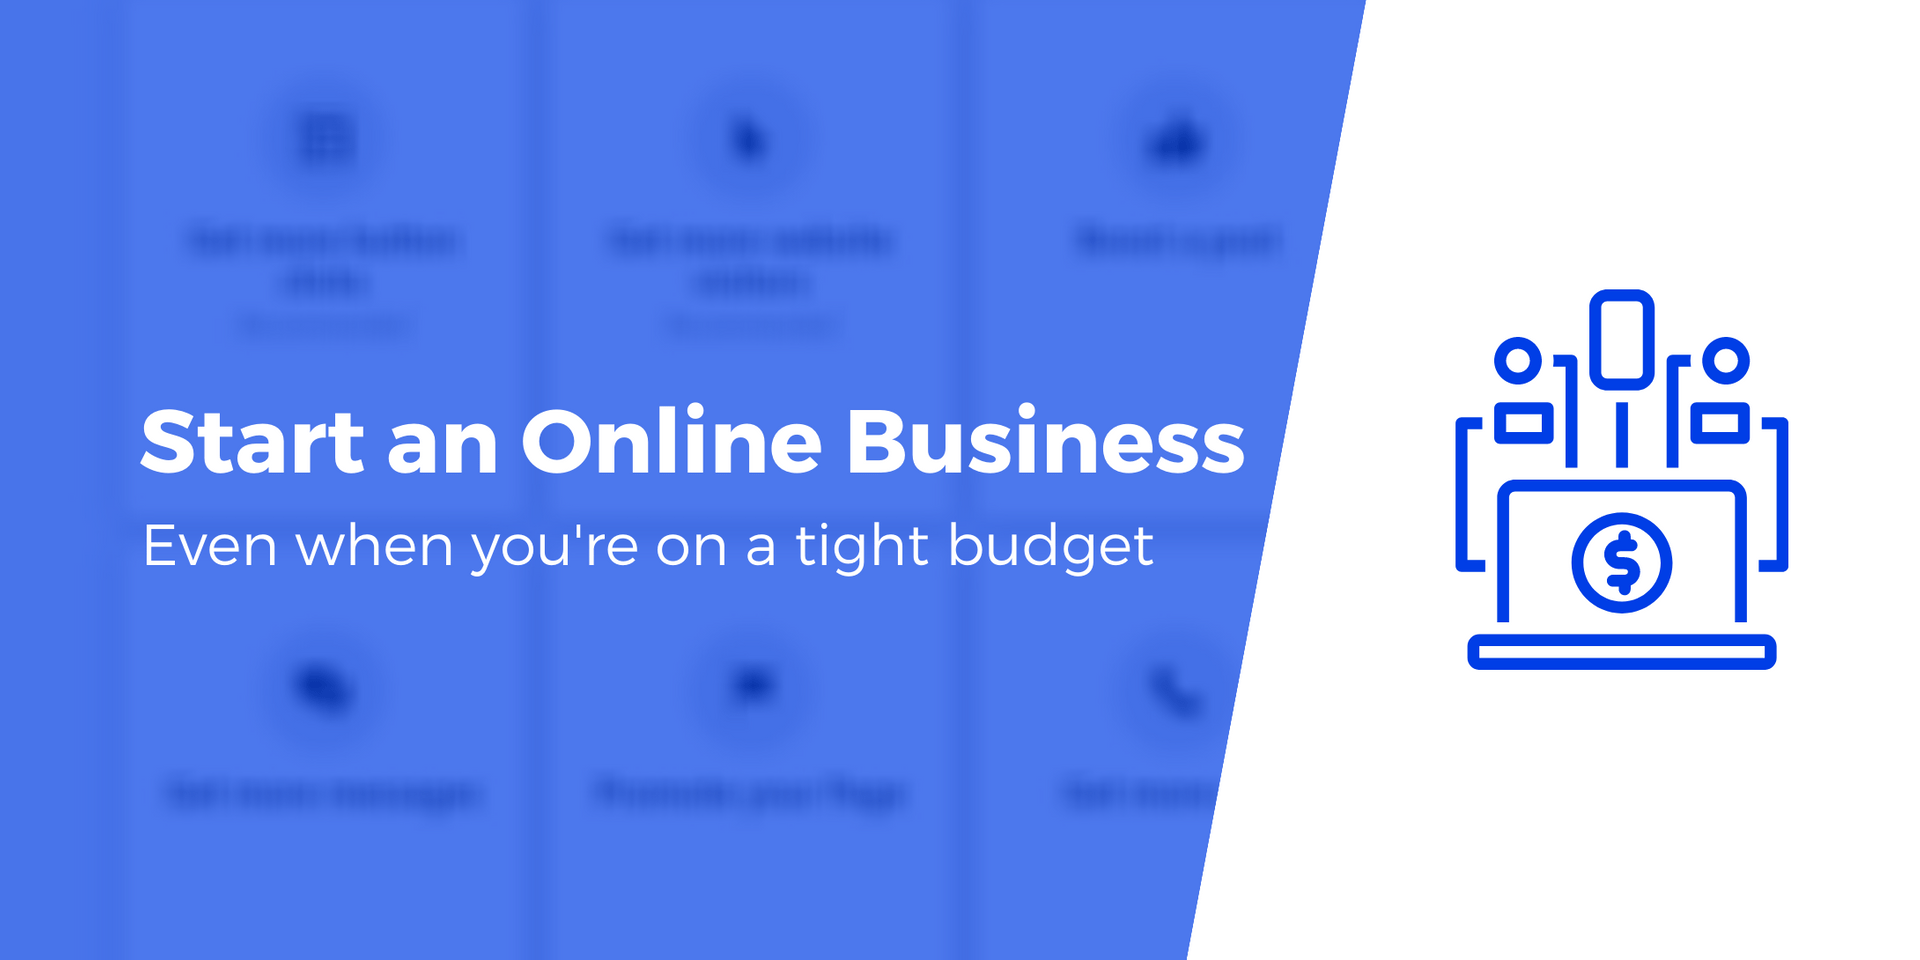 How to Start an Online Business for Less Than $145